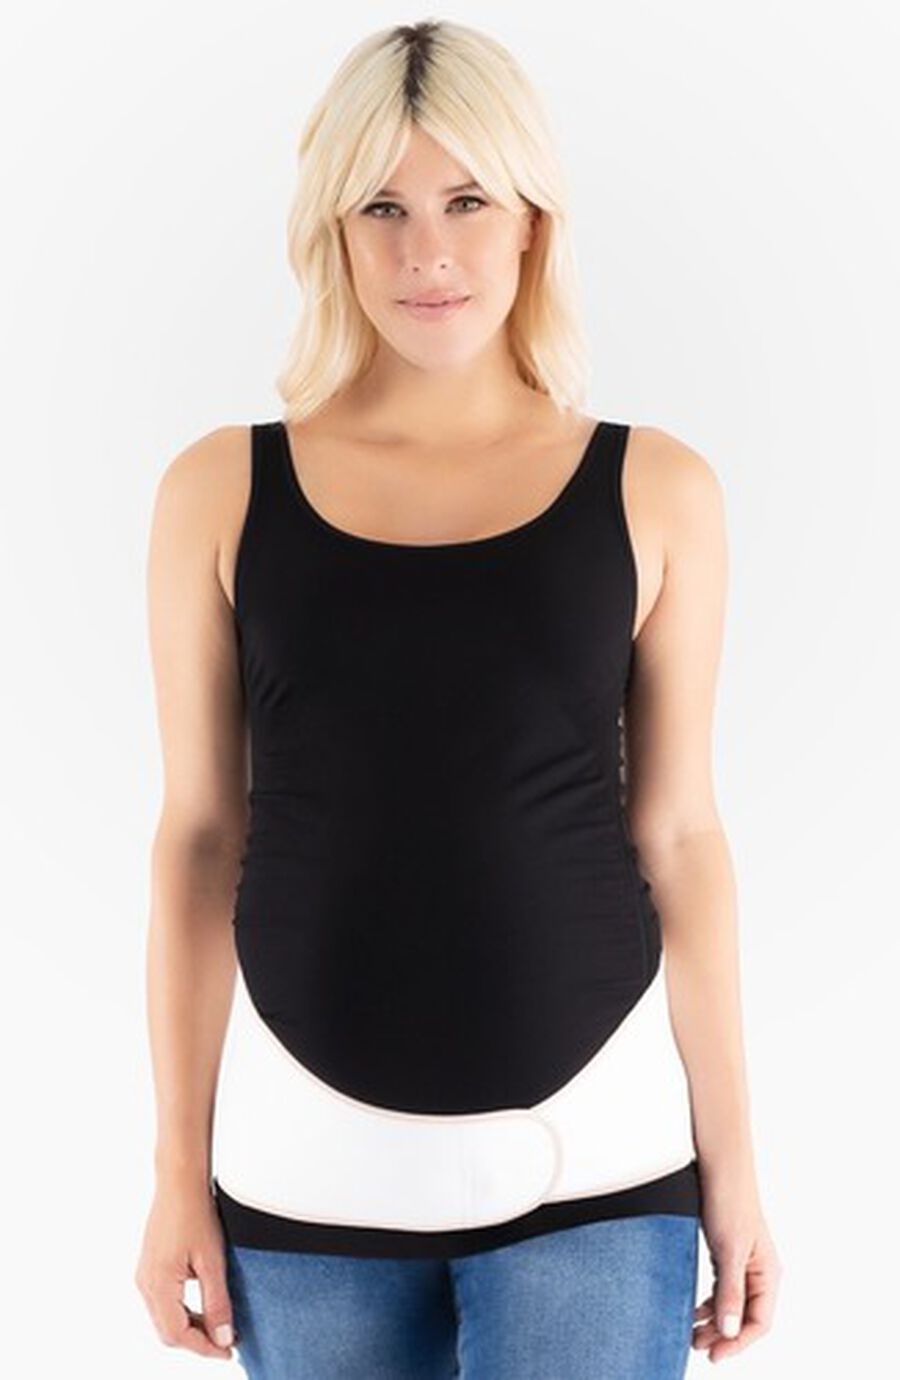 Belly Bandit Maternity Pelvic Support, , large image number 5